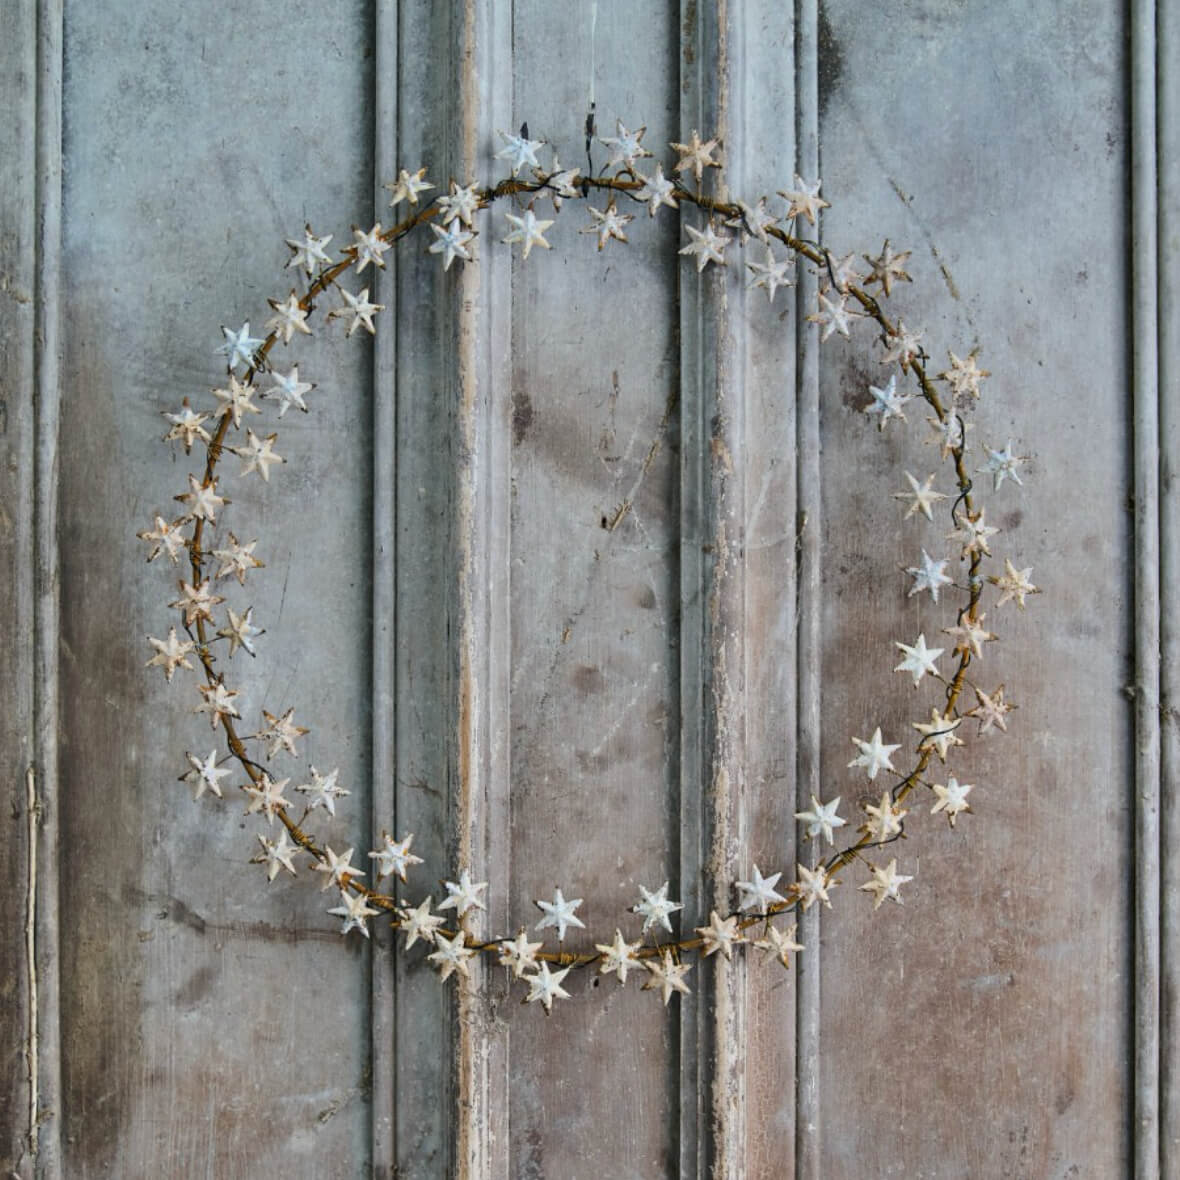 LED fairly light star wreath on rustic panelling